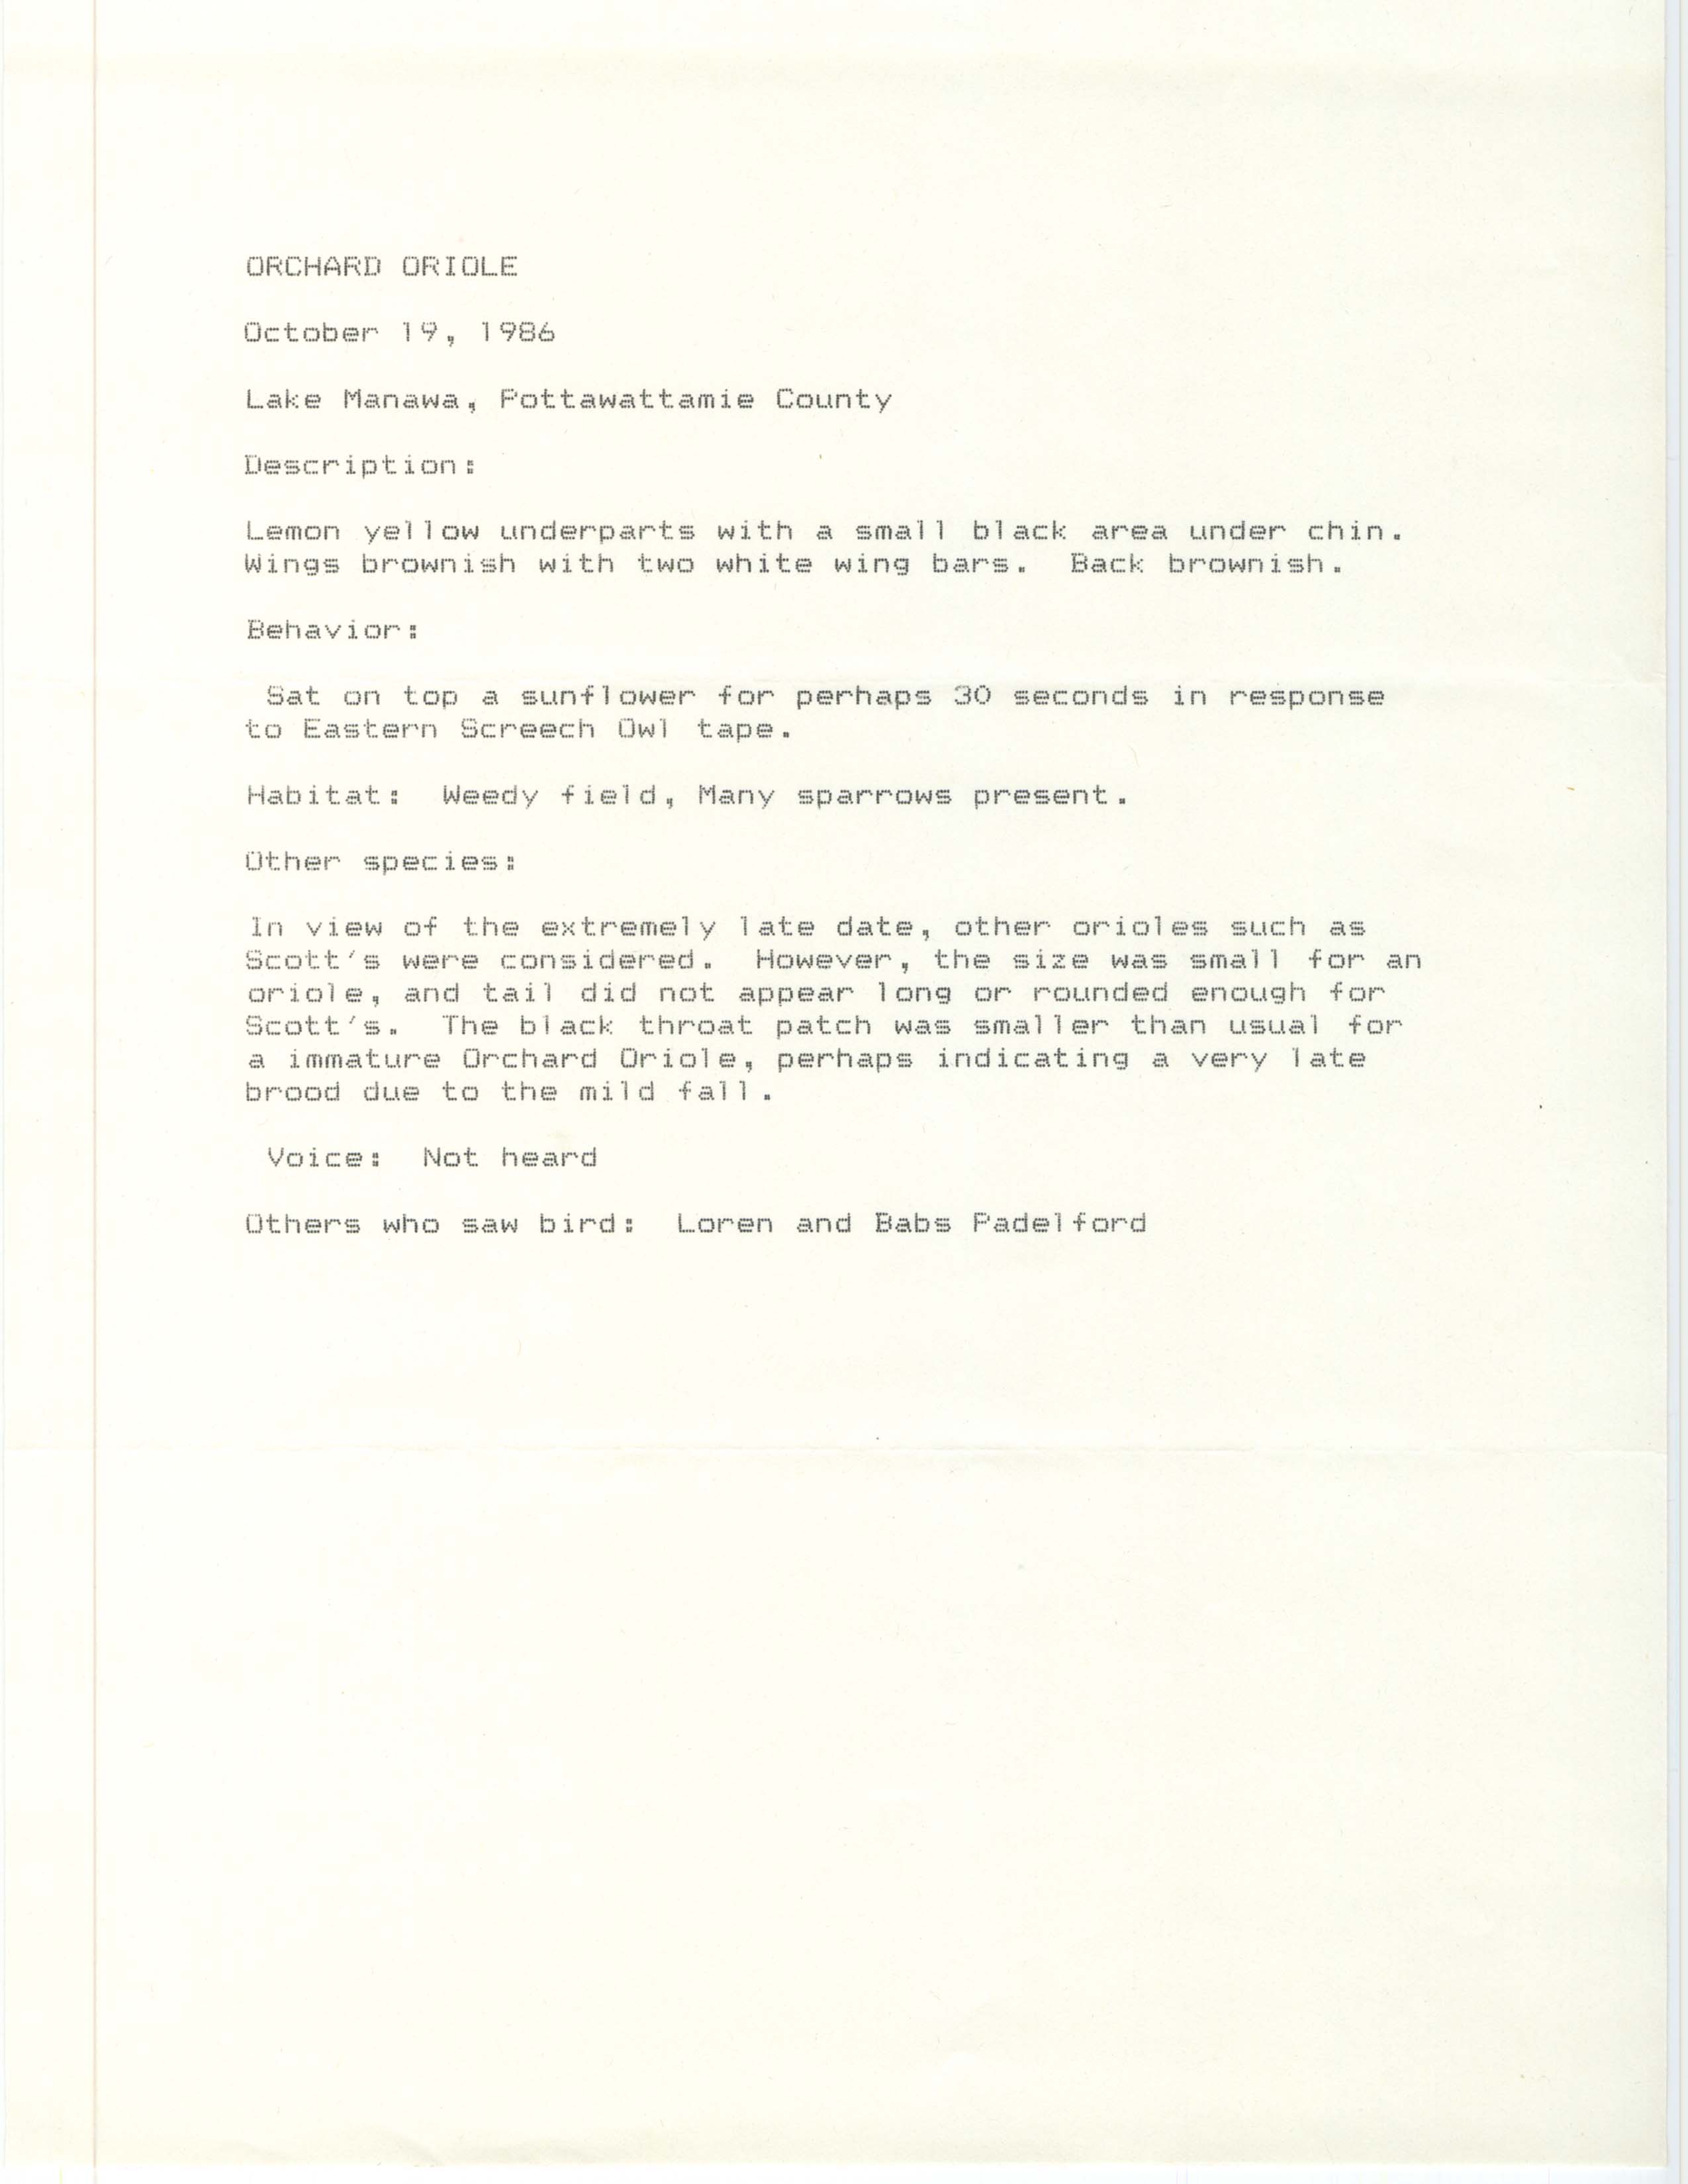 Rare bird documentation form for Orchard Oriole at Lake Manawa in 1986